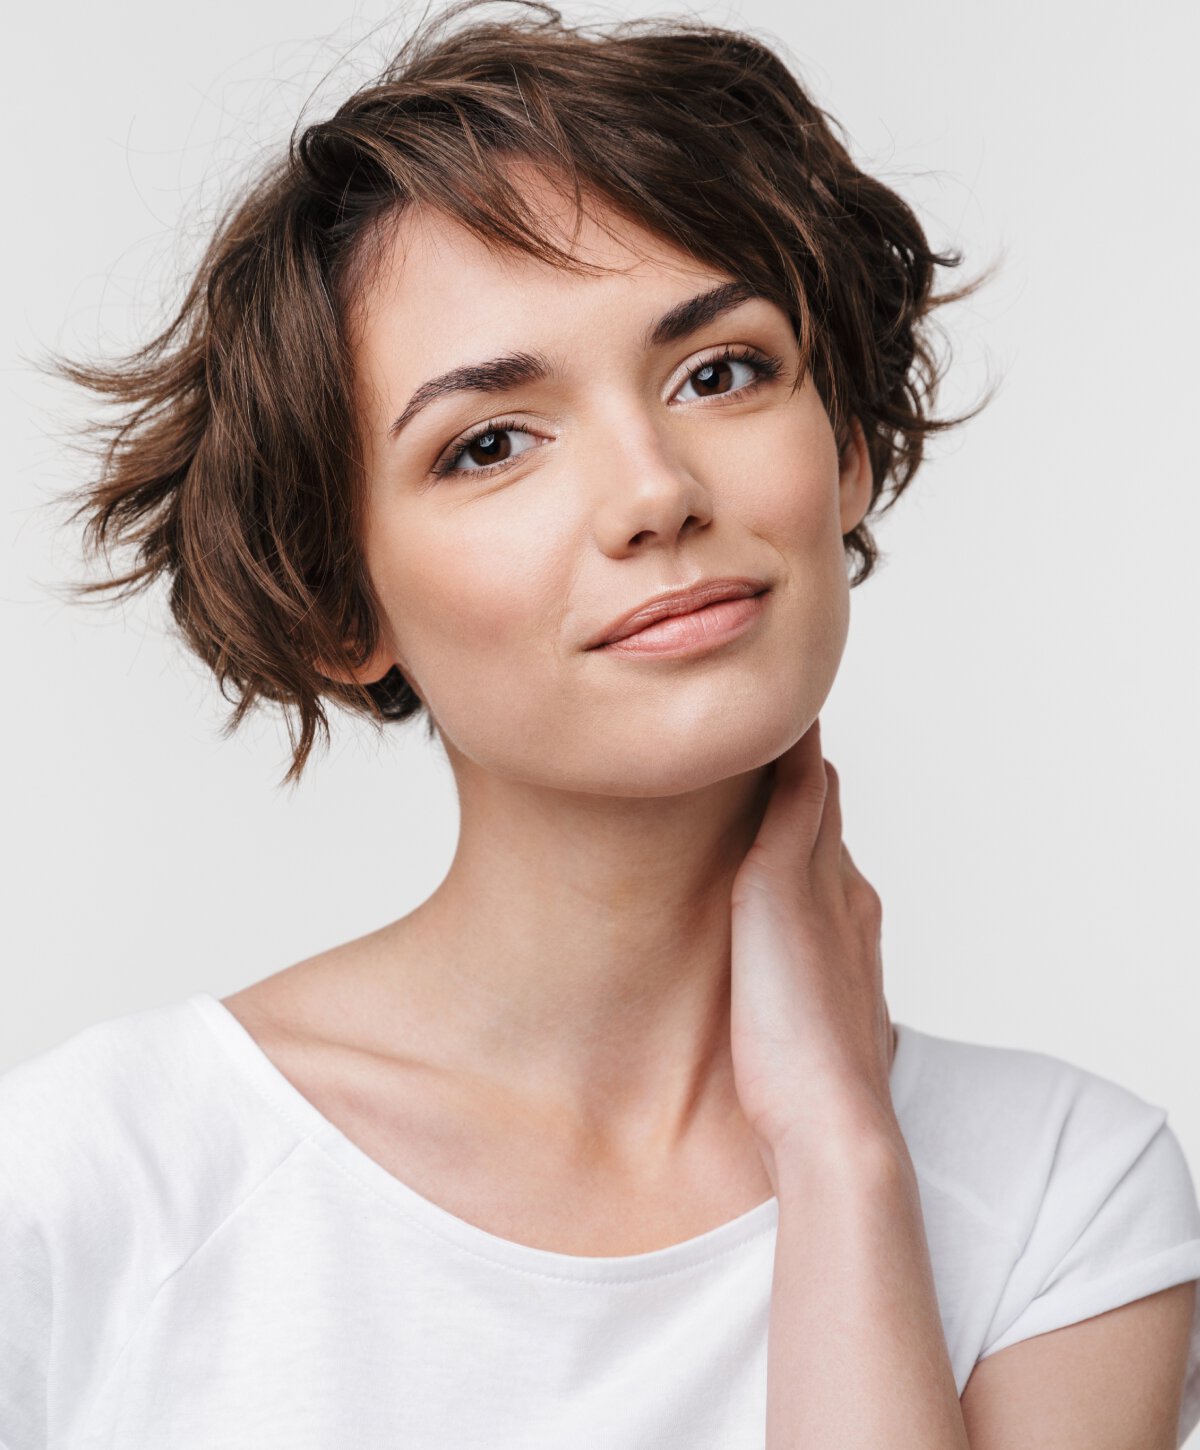 Woman with brown hair touching her neck